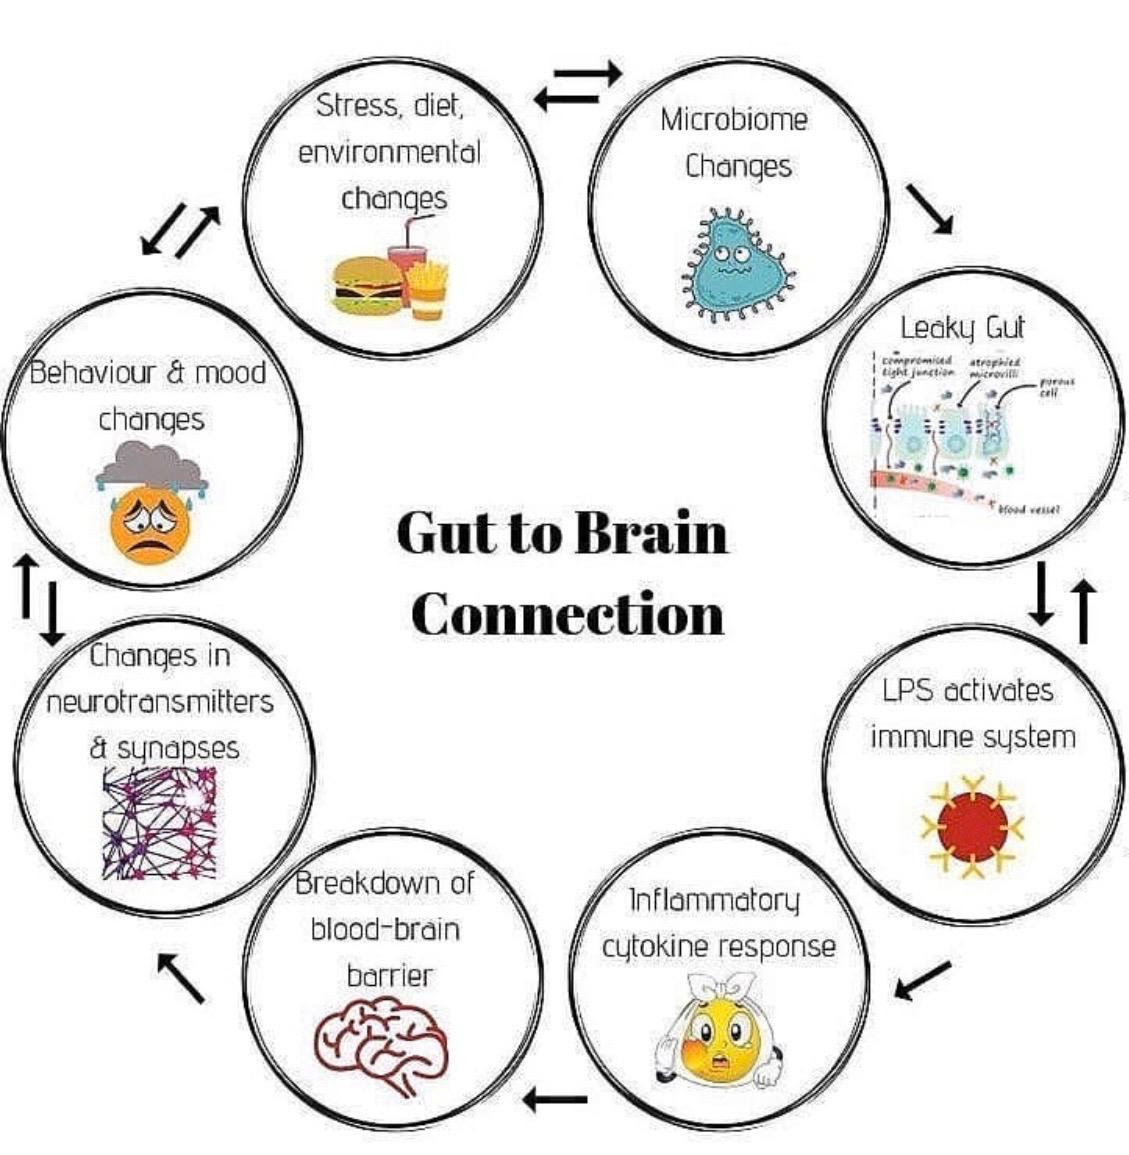 Cut to Brain Connection